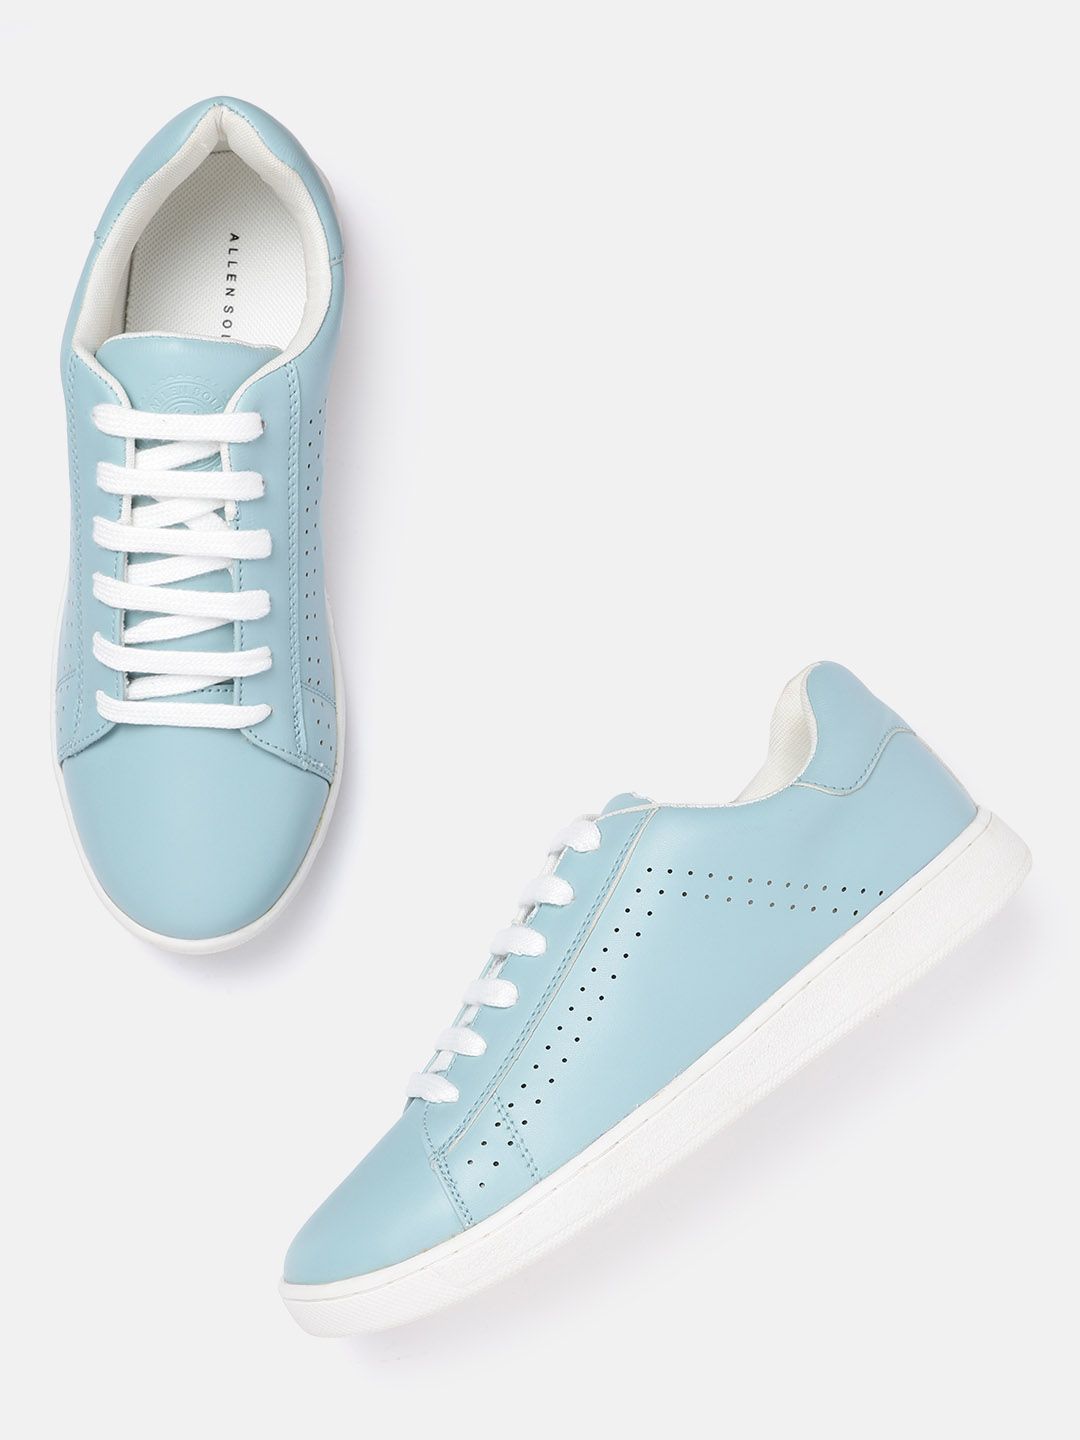 Allen Solly Women Blue Solid Sneakers with Perforated Detail Price in India